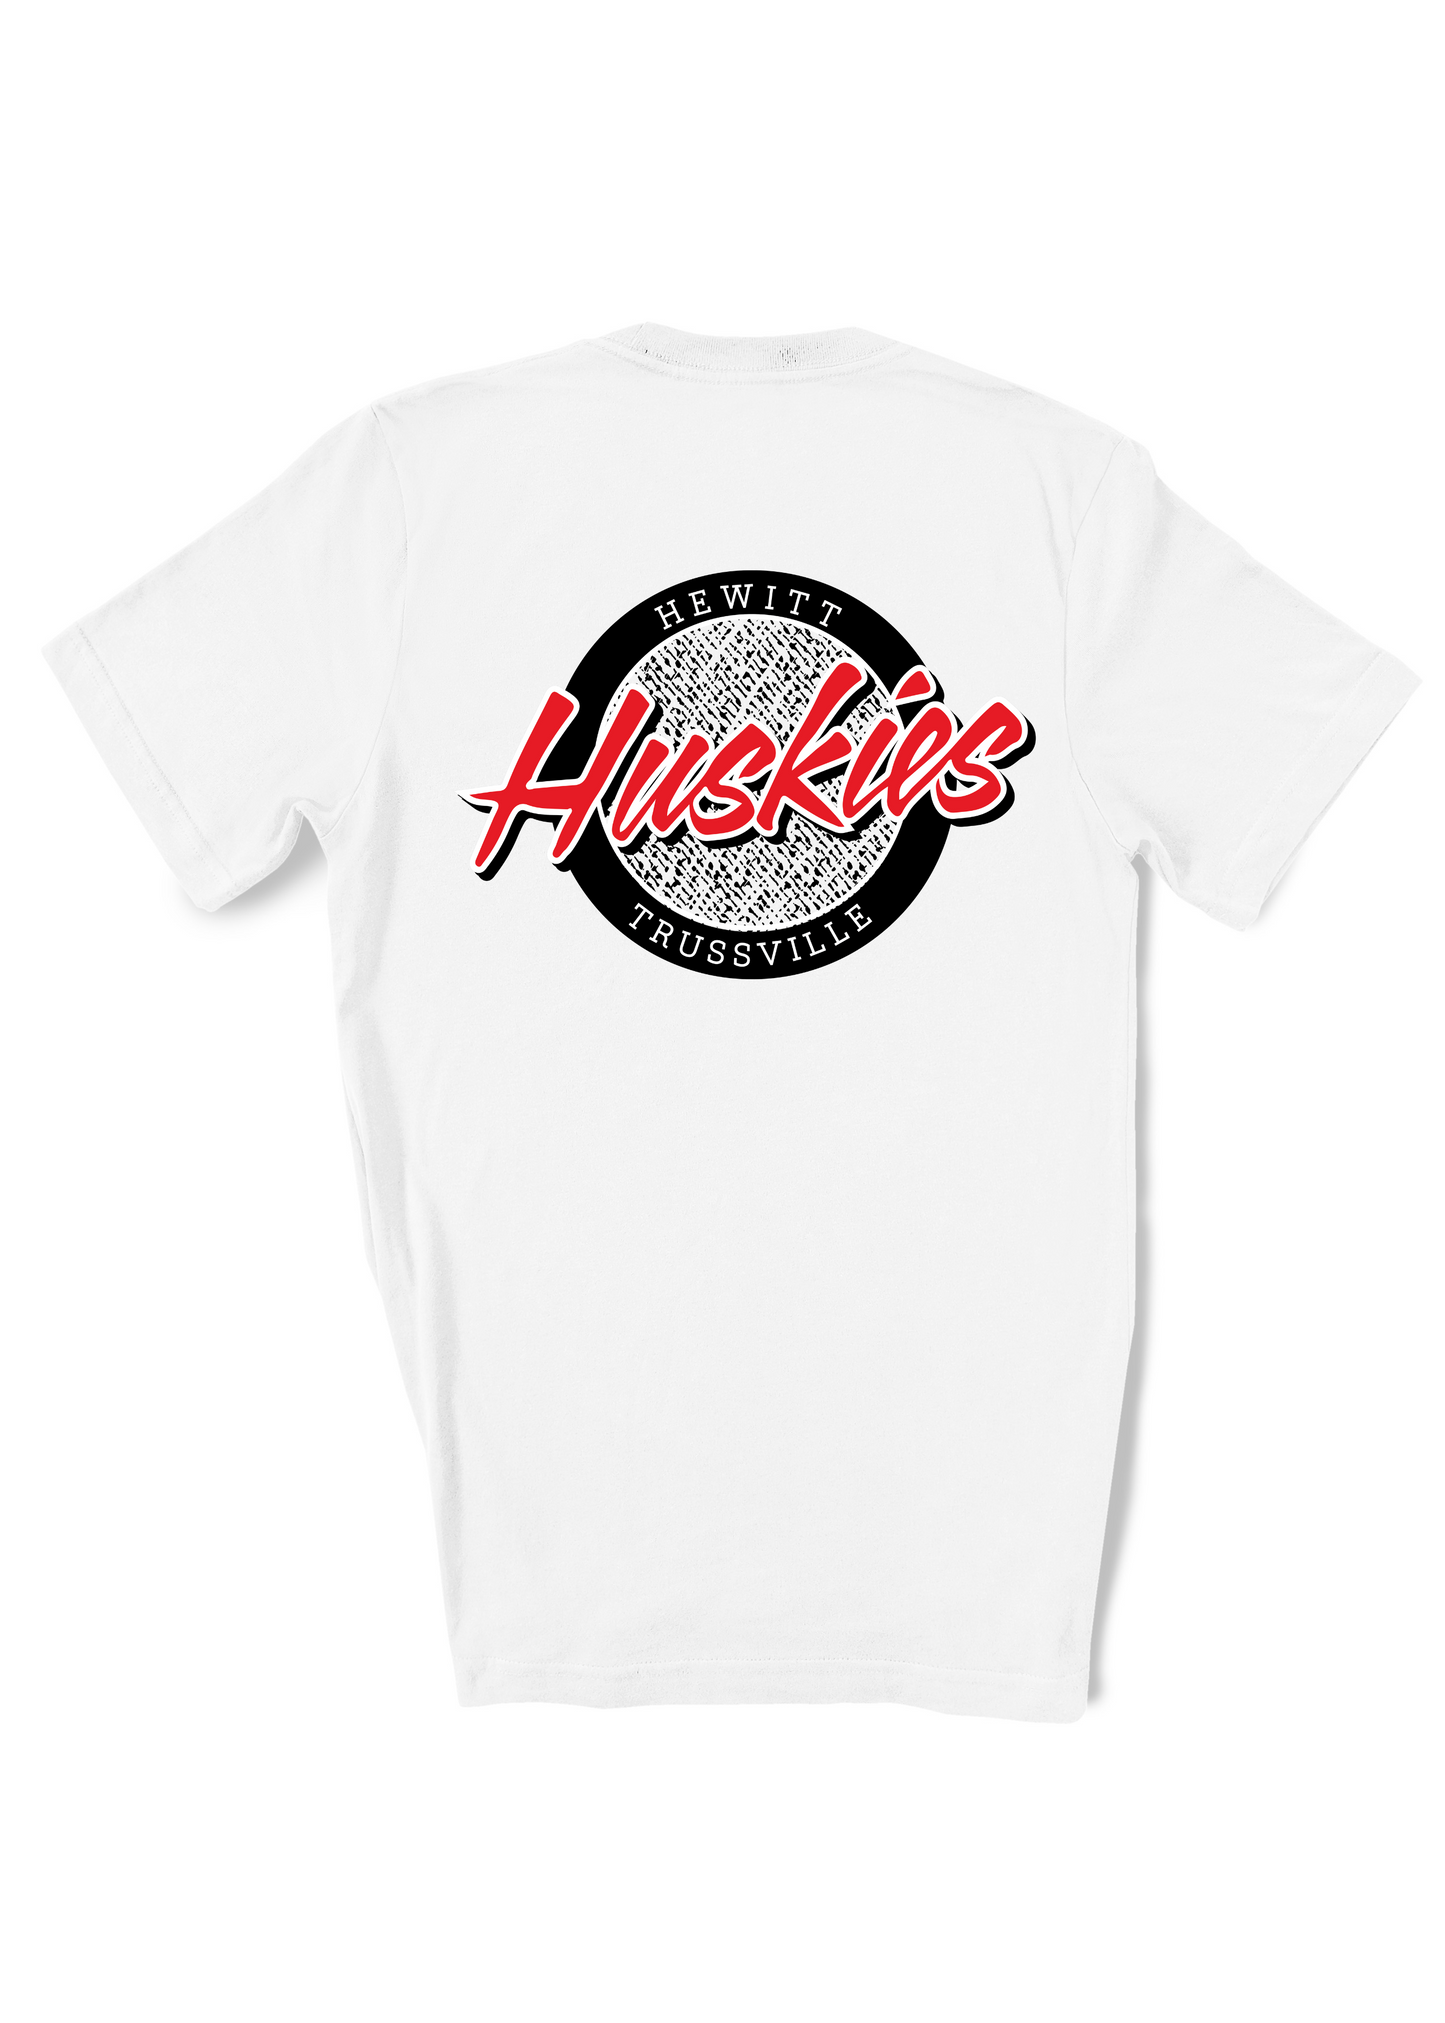 Huskies Throwback | Adult Tee-Adult Tee-Sister Shirts-Sister Shirts, Cute & Custom Tees for Mama & Littles in Trussville, Alabama.